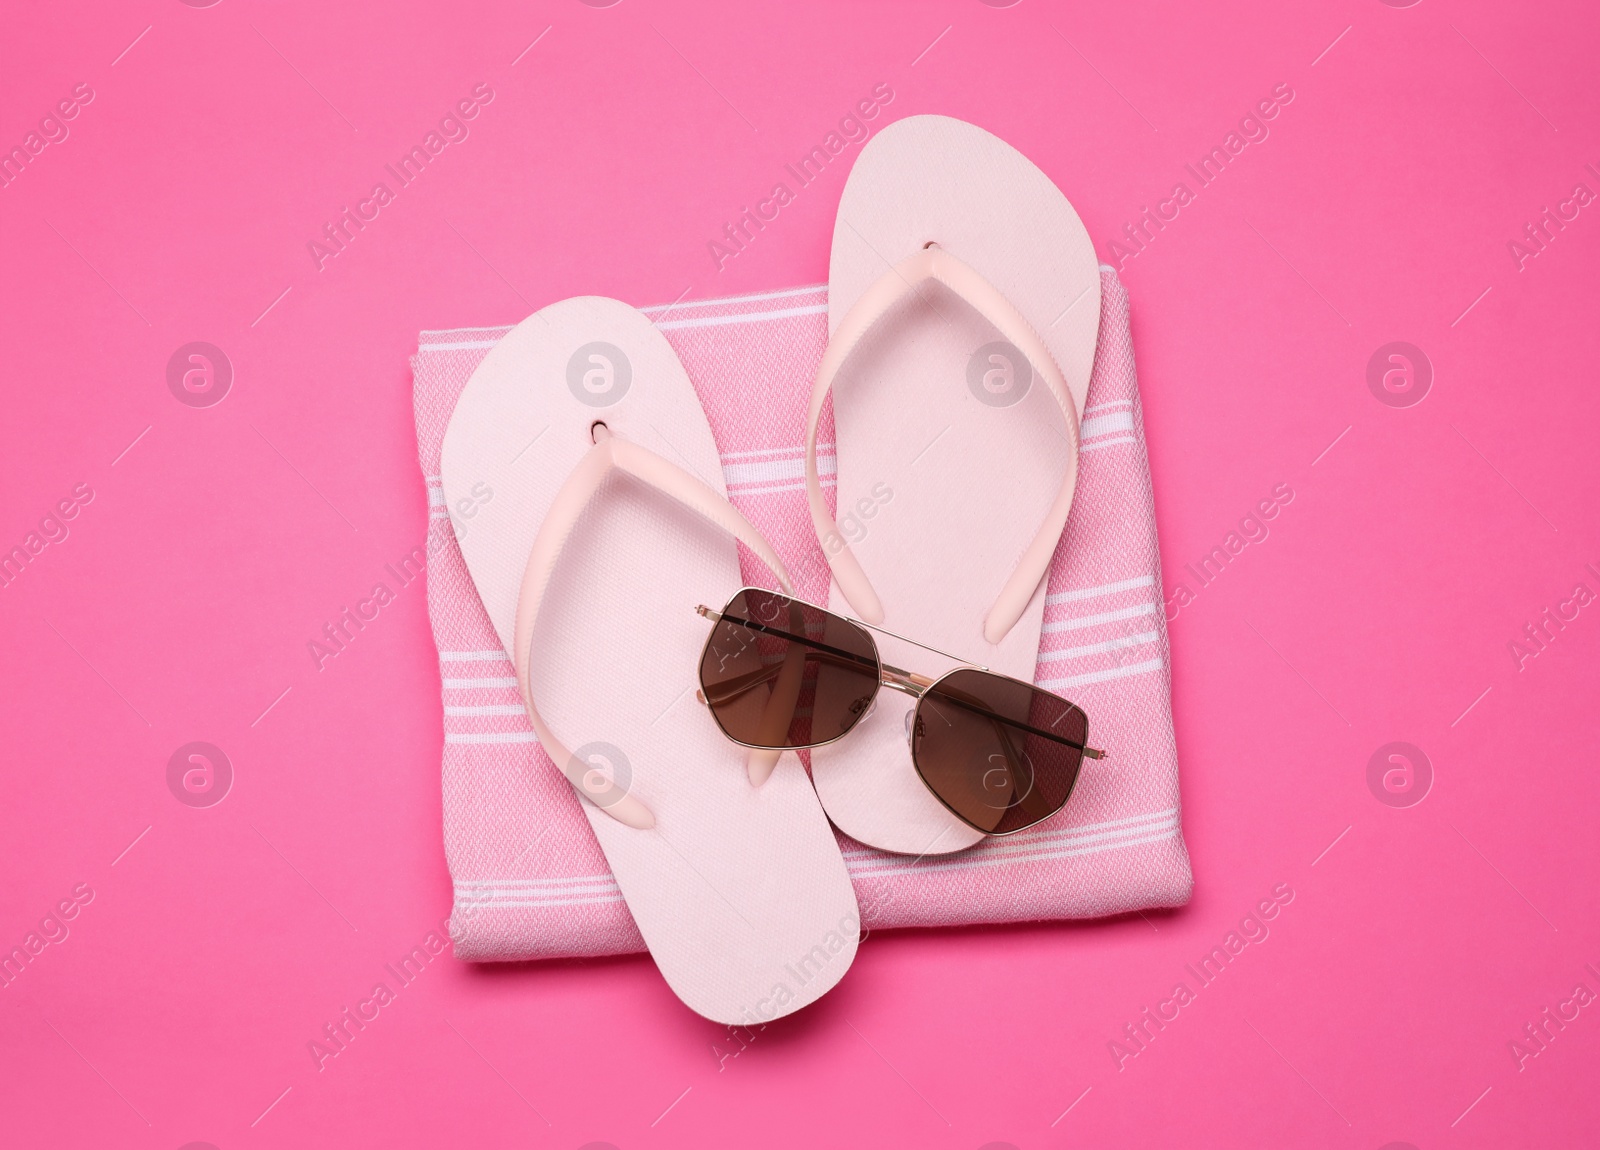 Photo of Towel, flip flops and sunglasses on pink background, top view. Beach objects